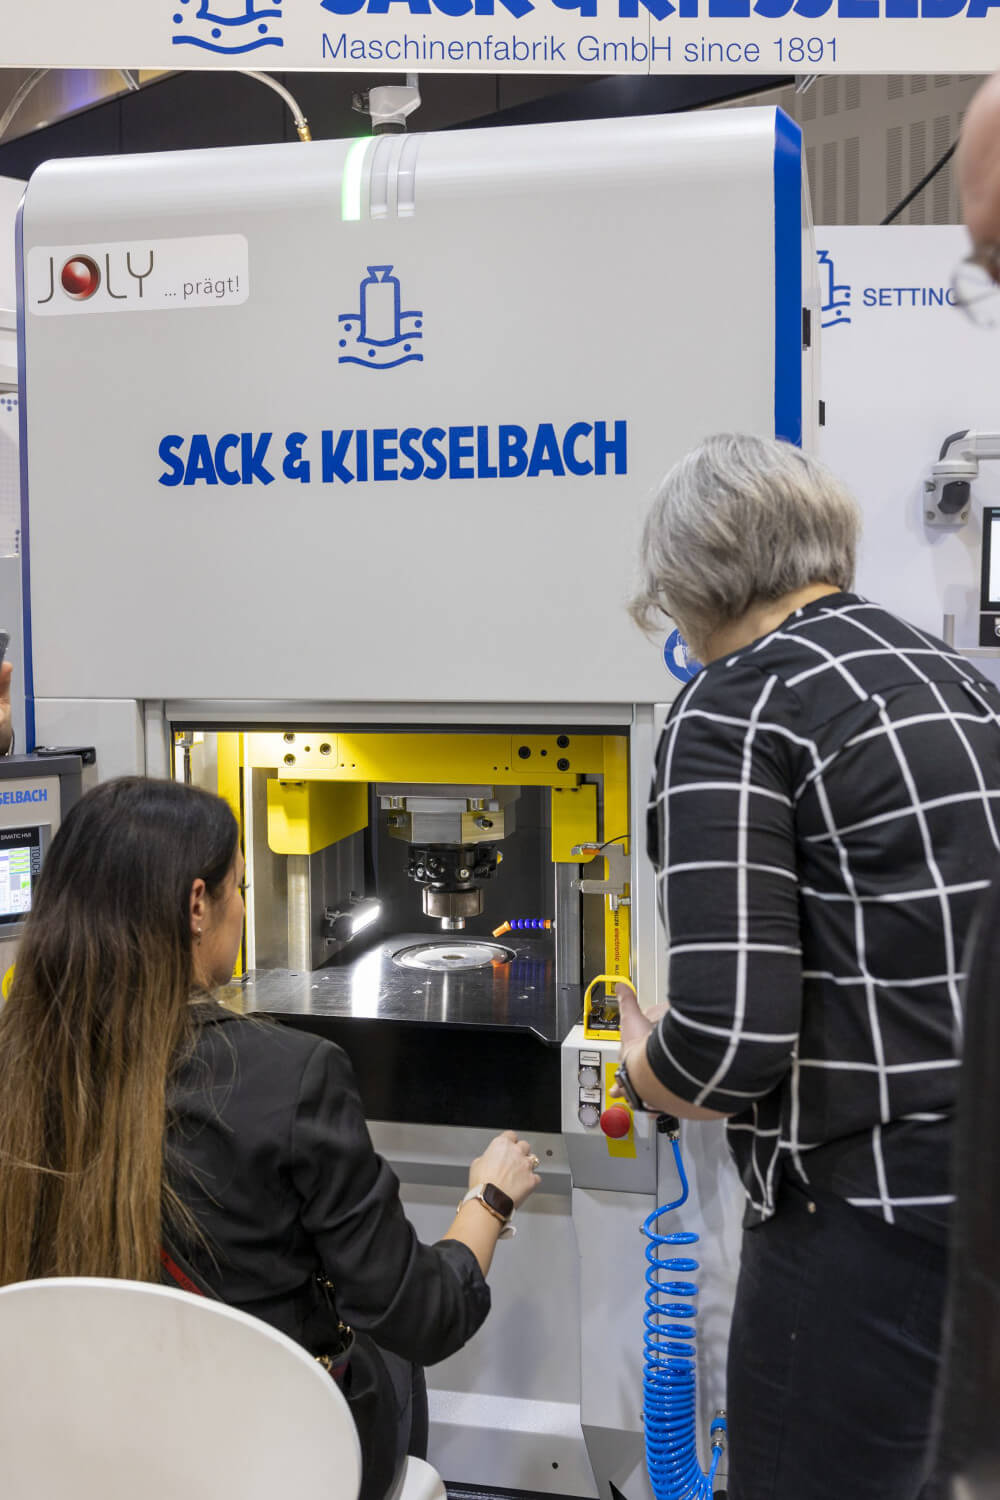 At the Sack & Kiesselbach display, visitors were also able to get hands-on with the huge machines. Photo: World Money Fair.